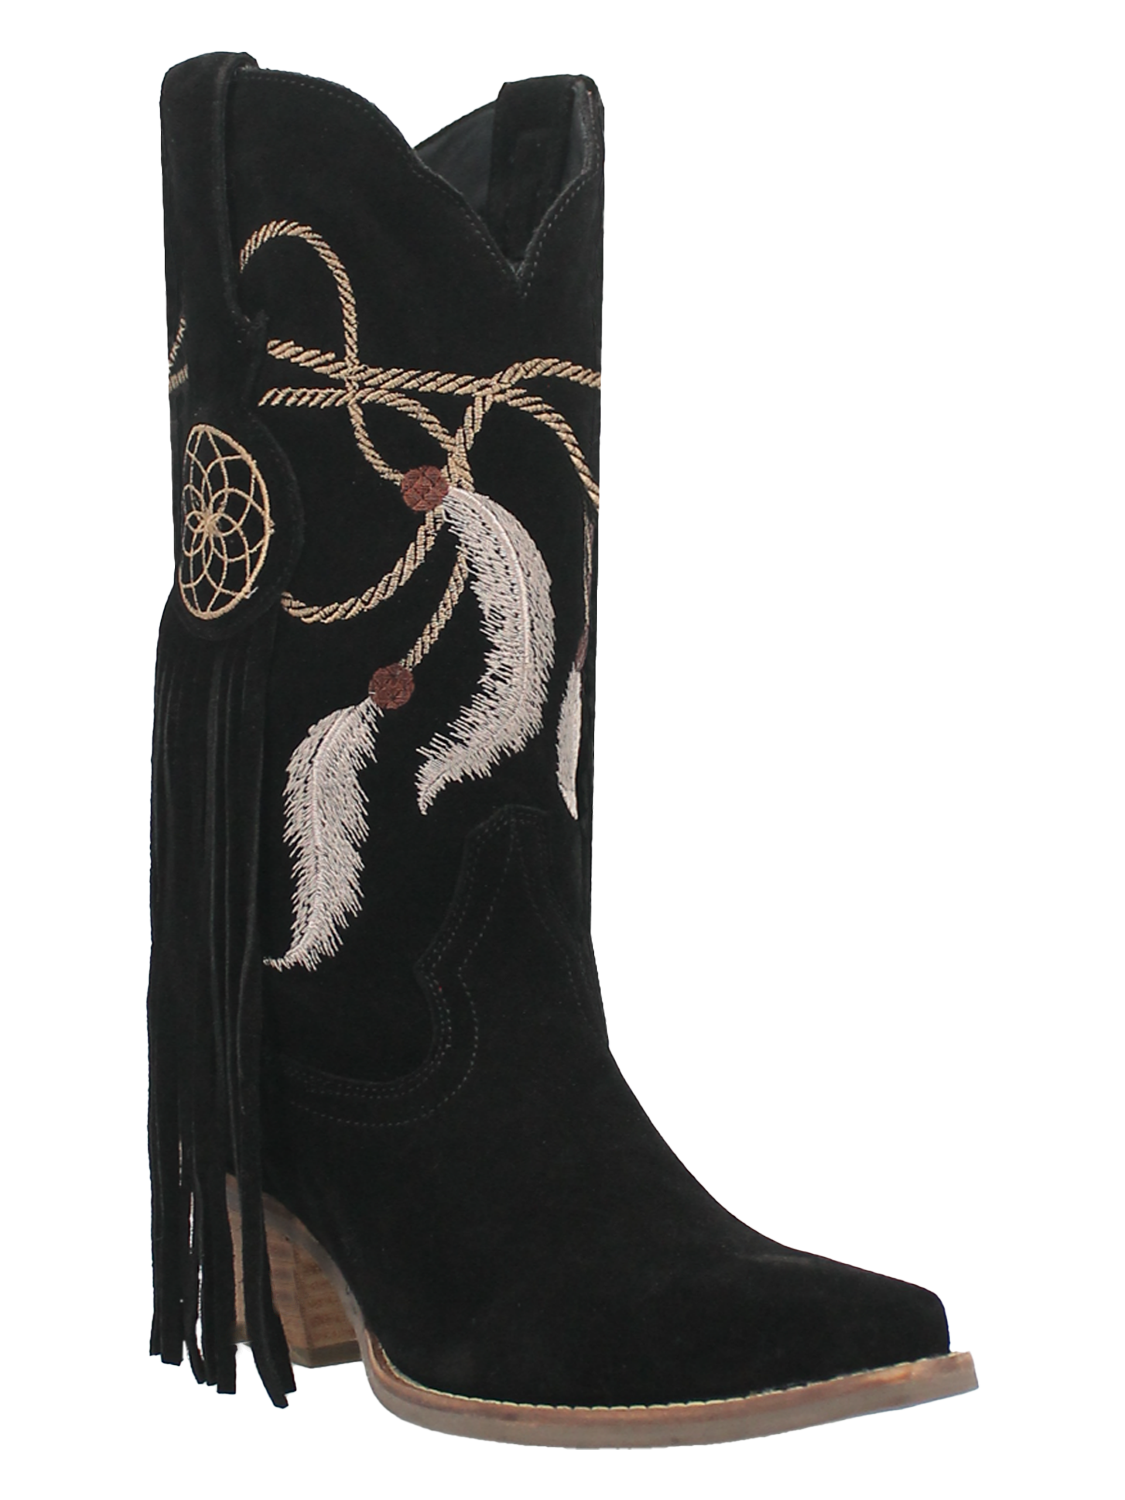 Feather embroidered black sued western boots.